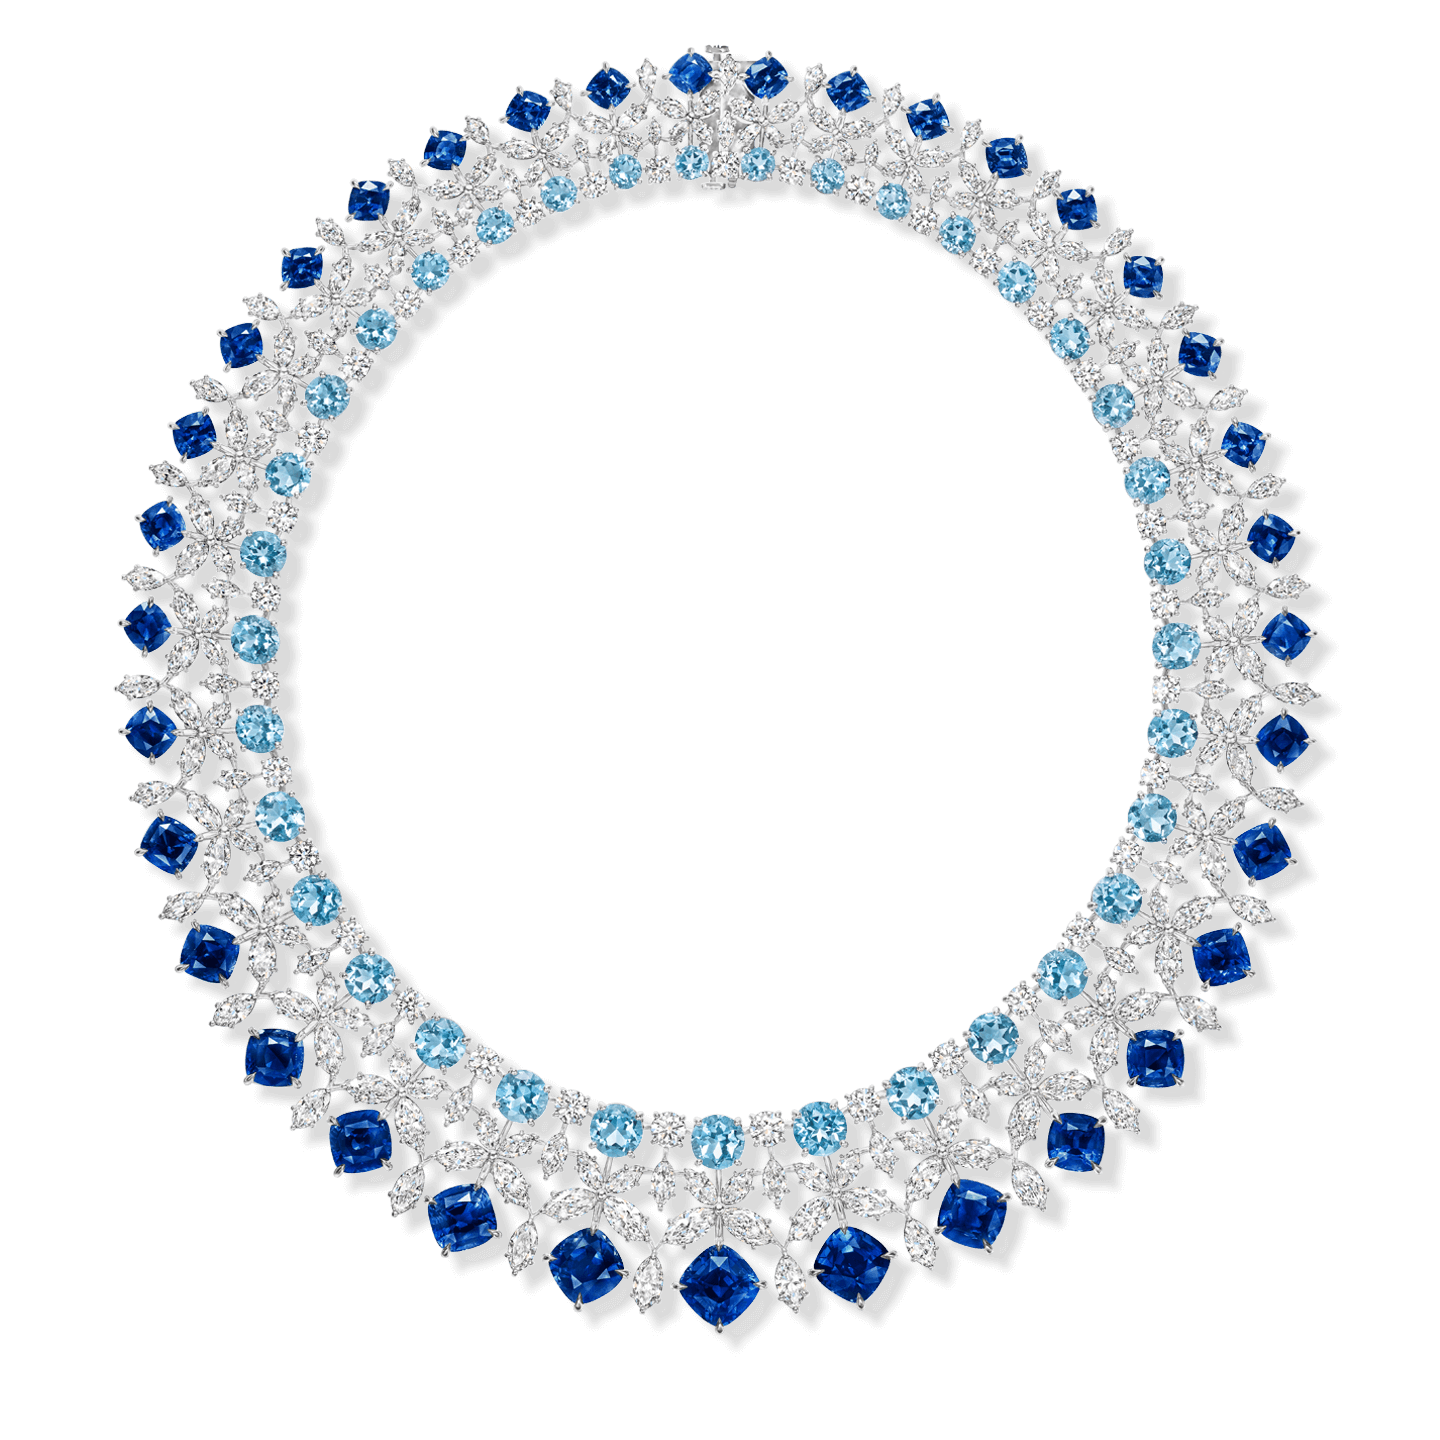 The Princess Necklace with Sapphires, Aquamarines and Diamonds